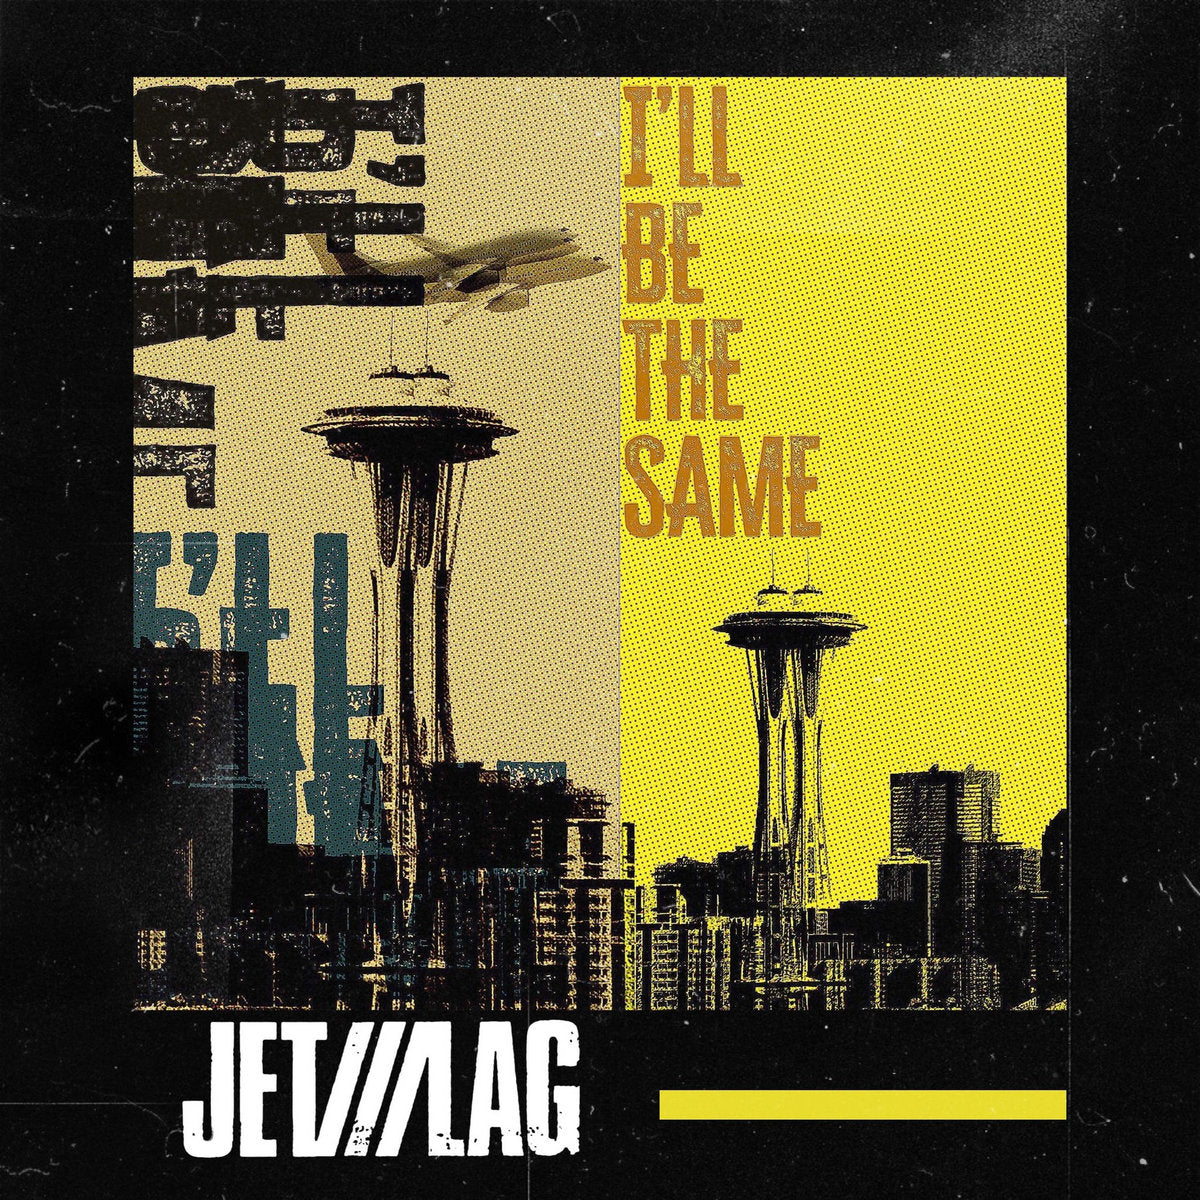 Seattle’s Jet///Lag unleash a wave of sharp indie-punk in new EP ‘I’ll Be The Same’